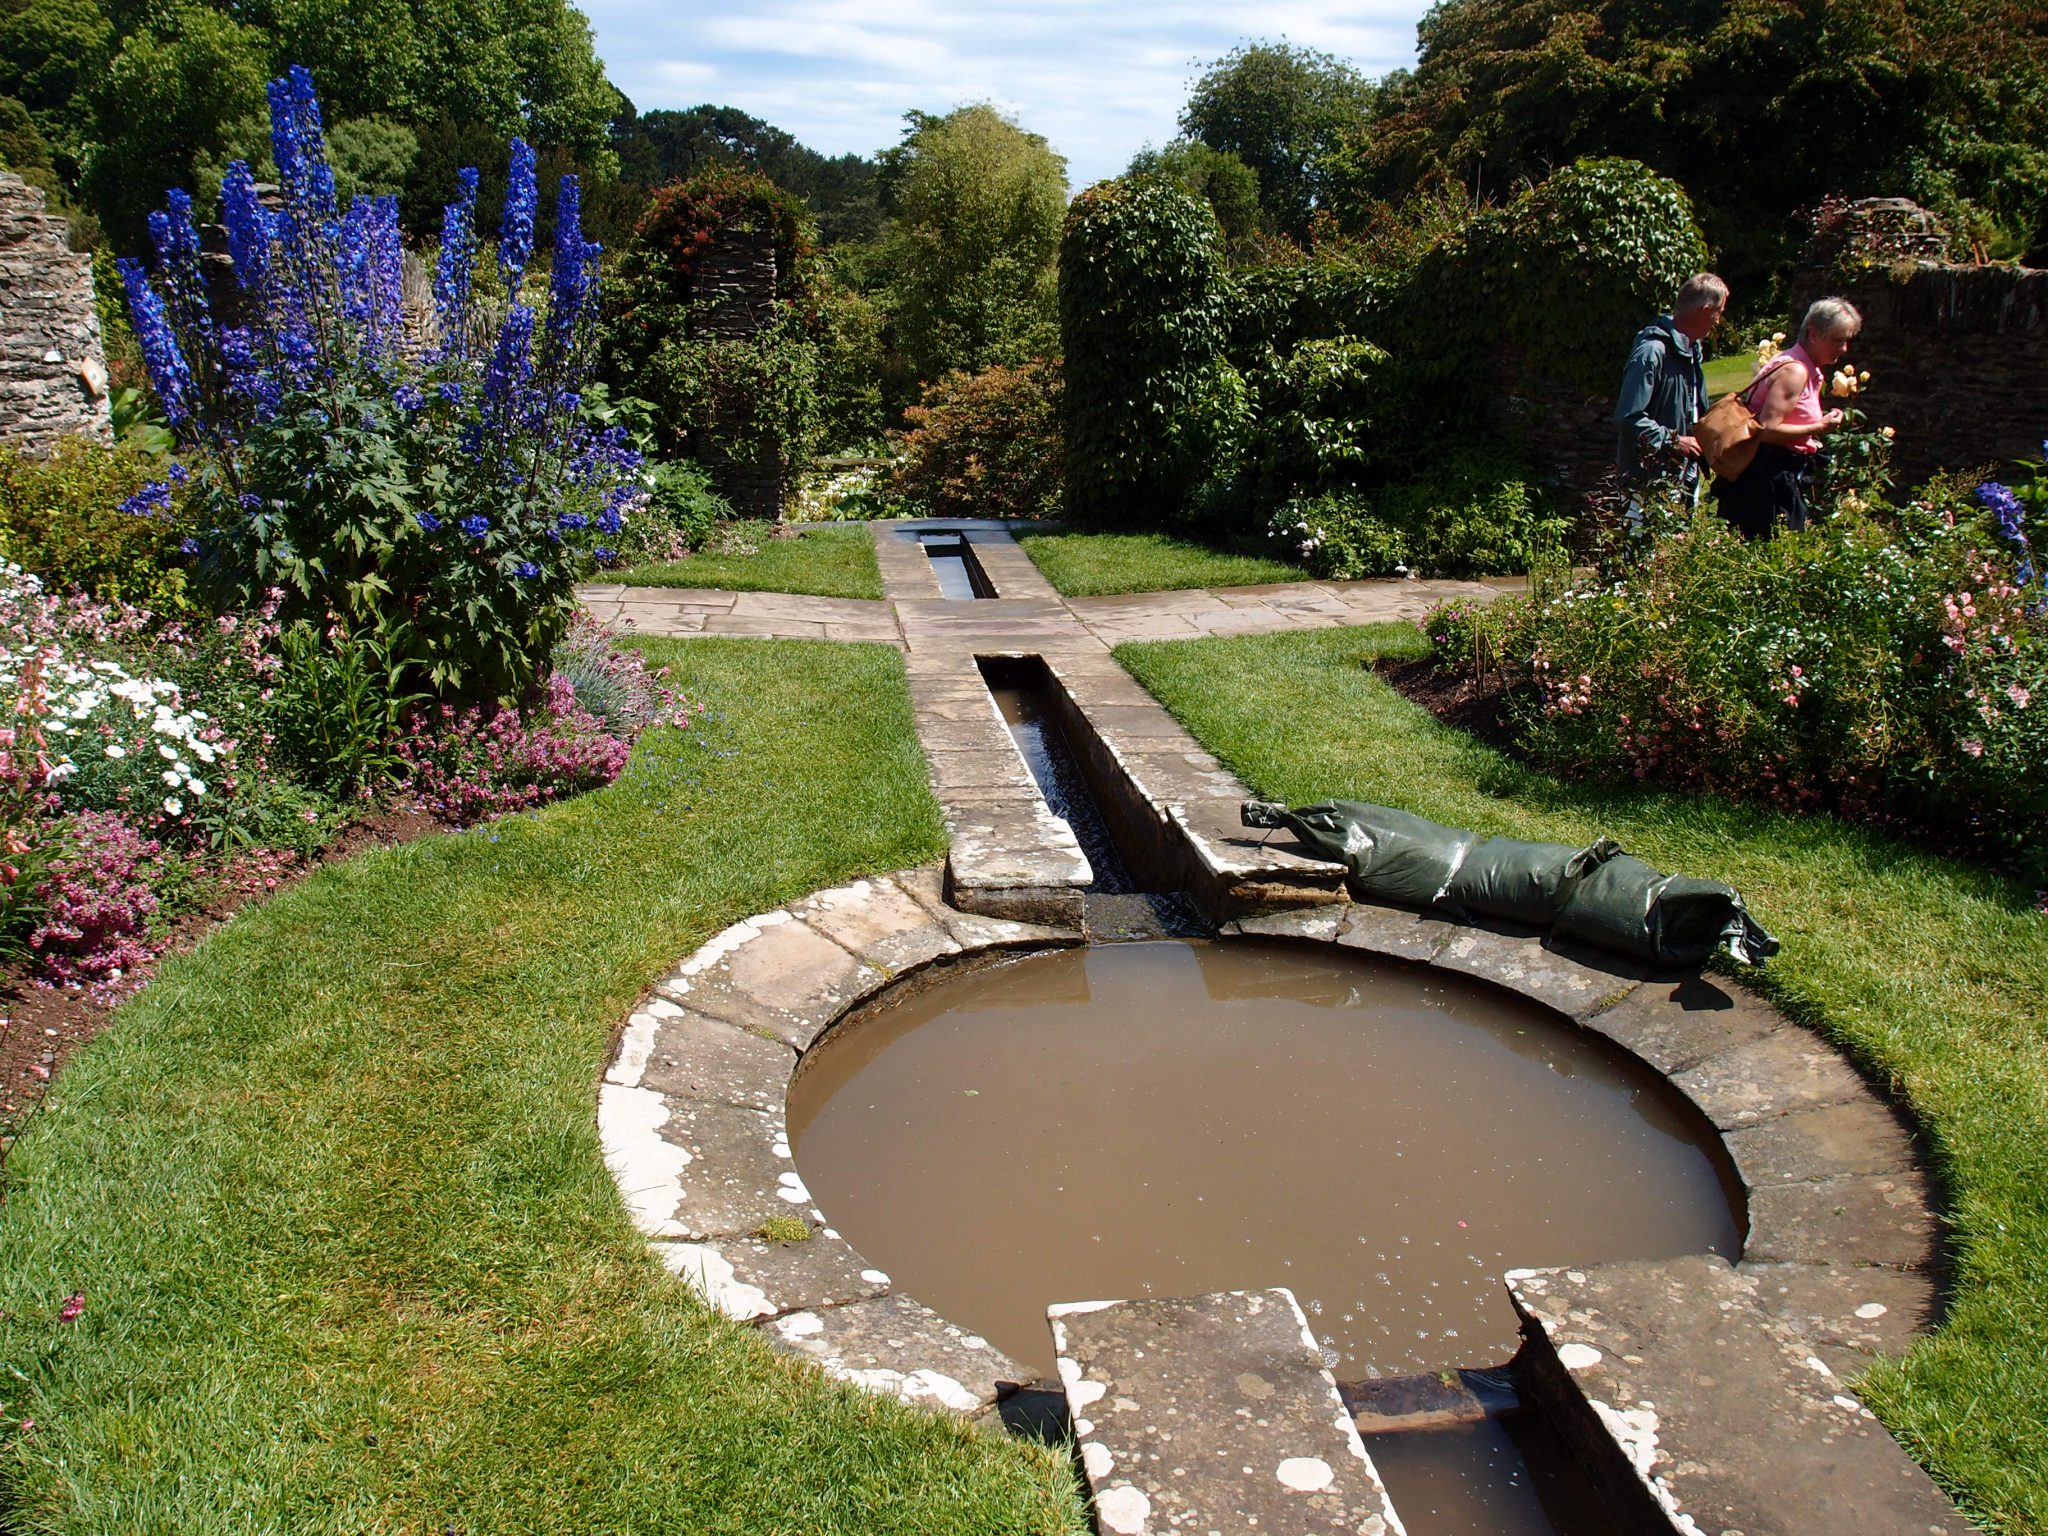 And now the view downstream, in the Rill Garden